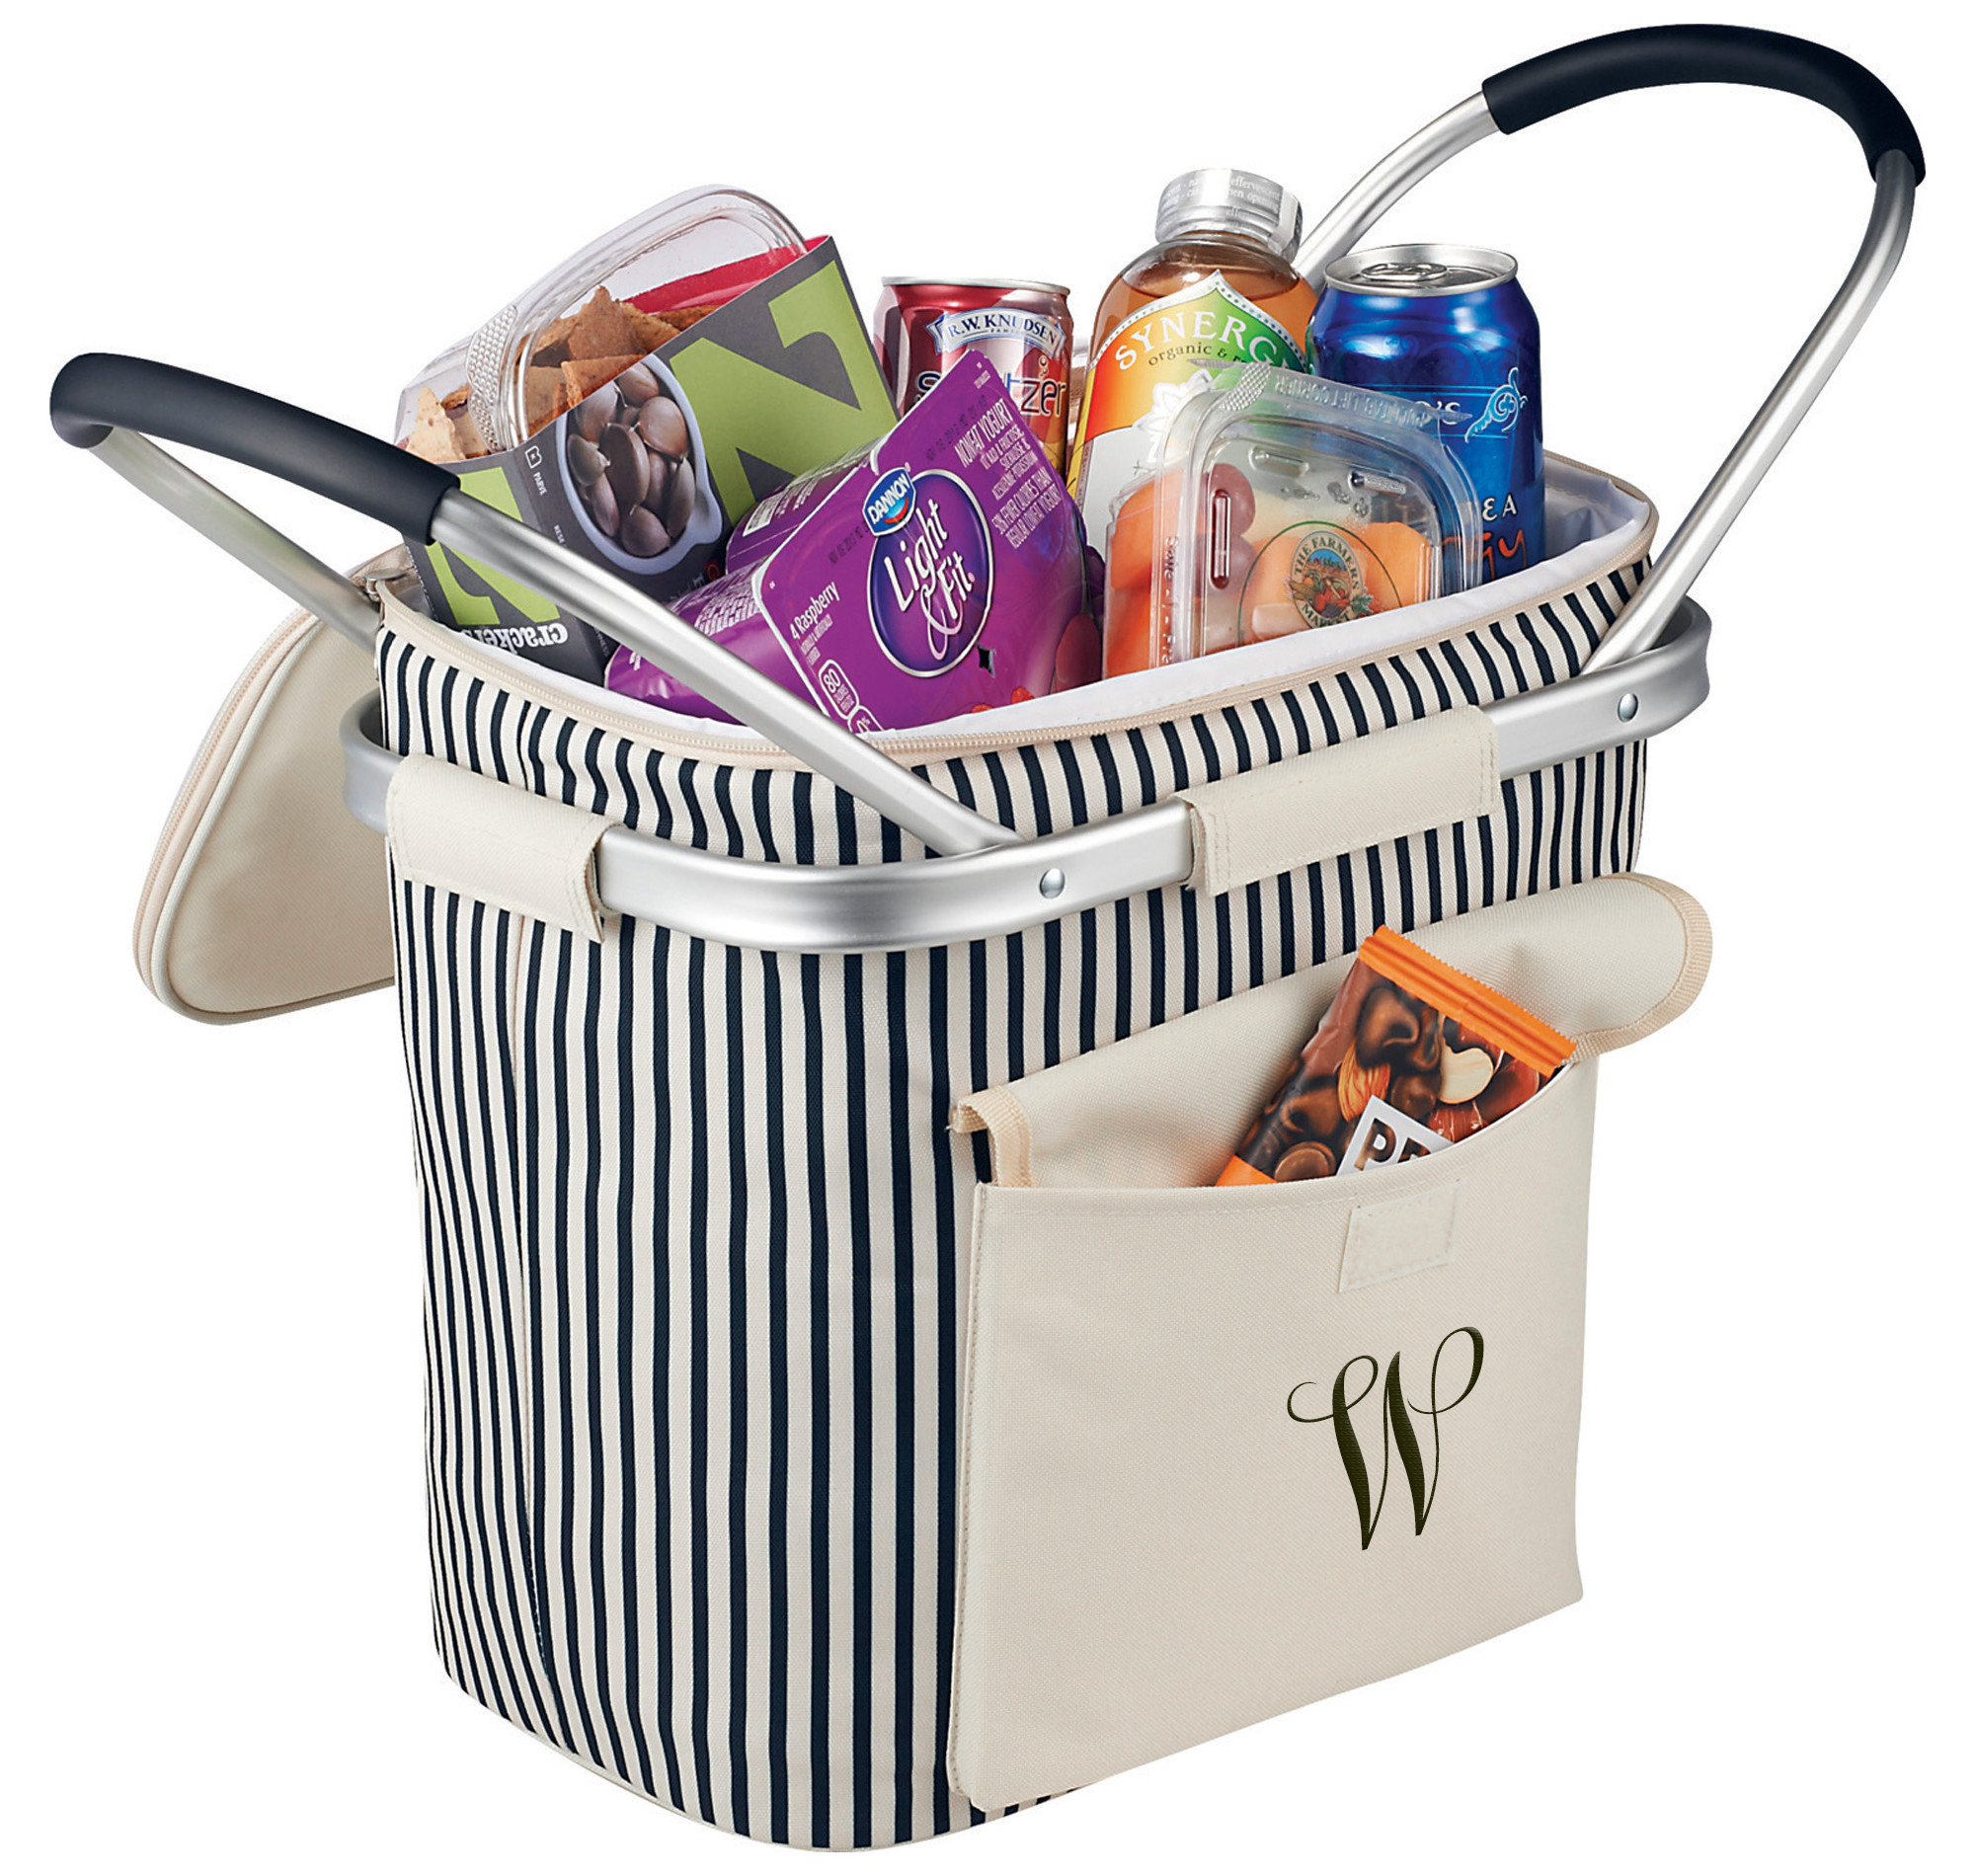 Collapsible Striped Picnic Basket Cooler with Double Aluminum Handles*